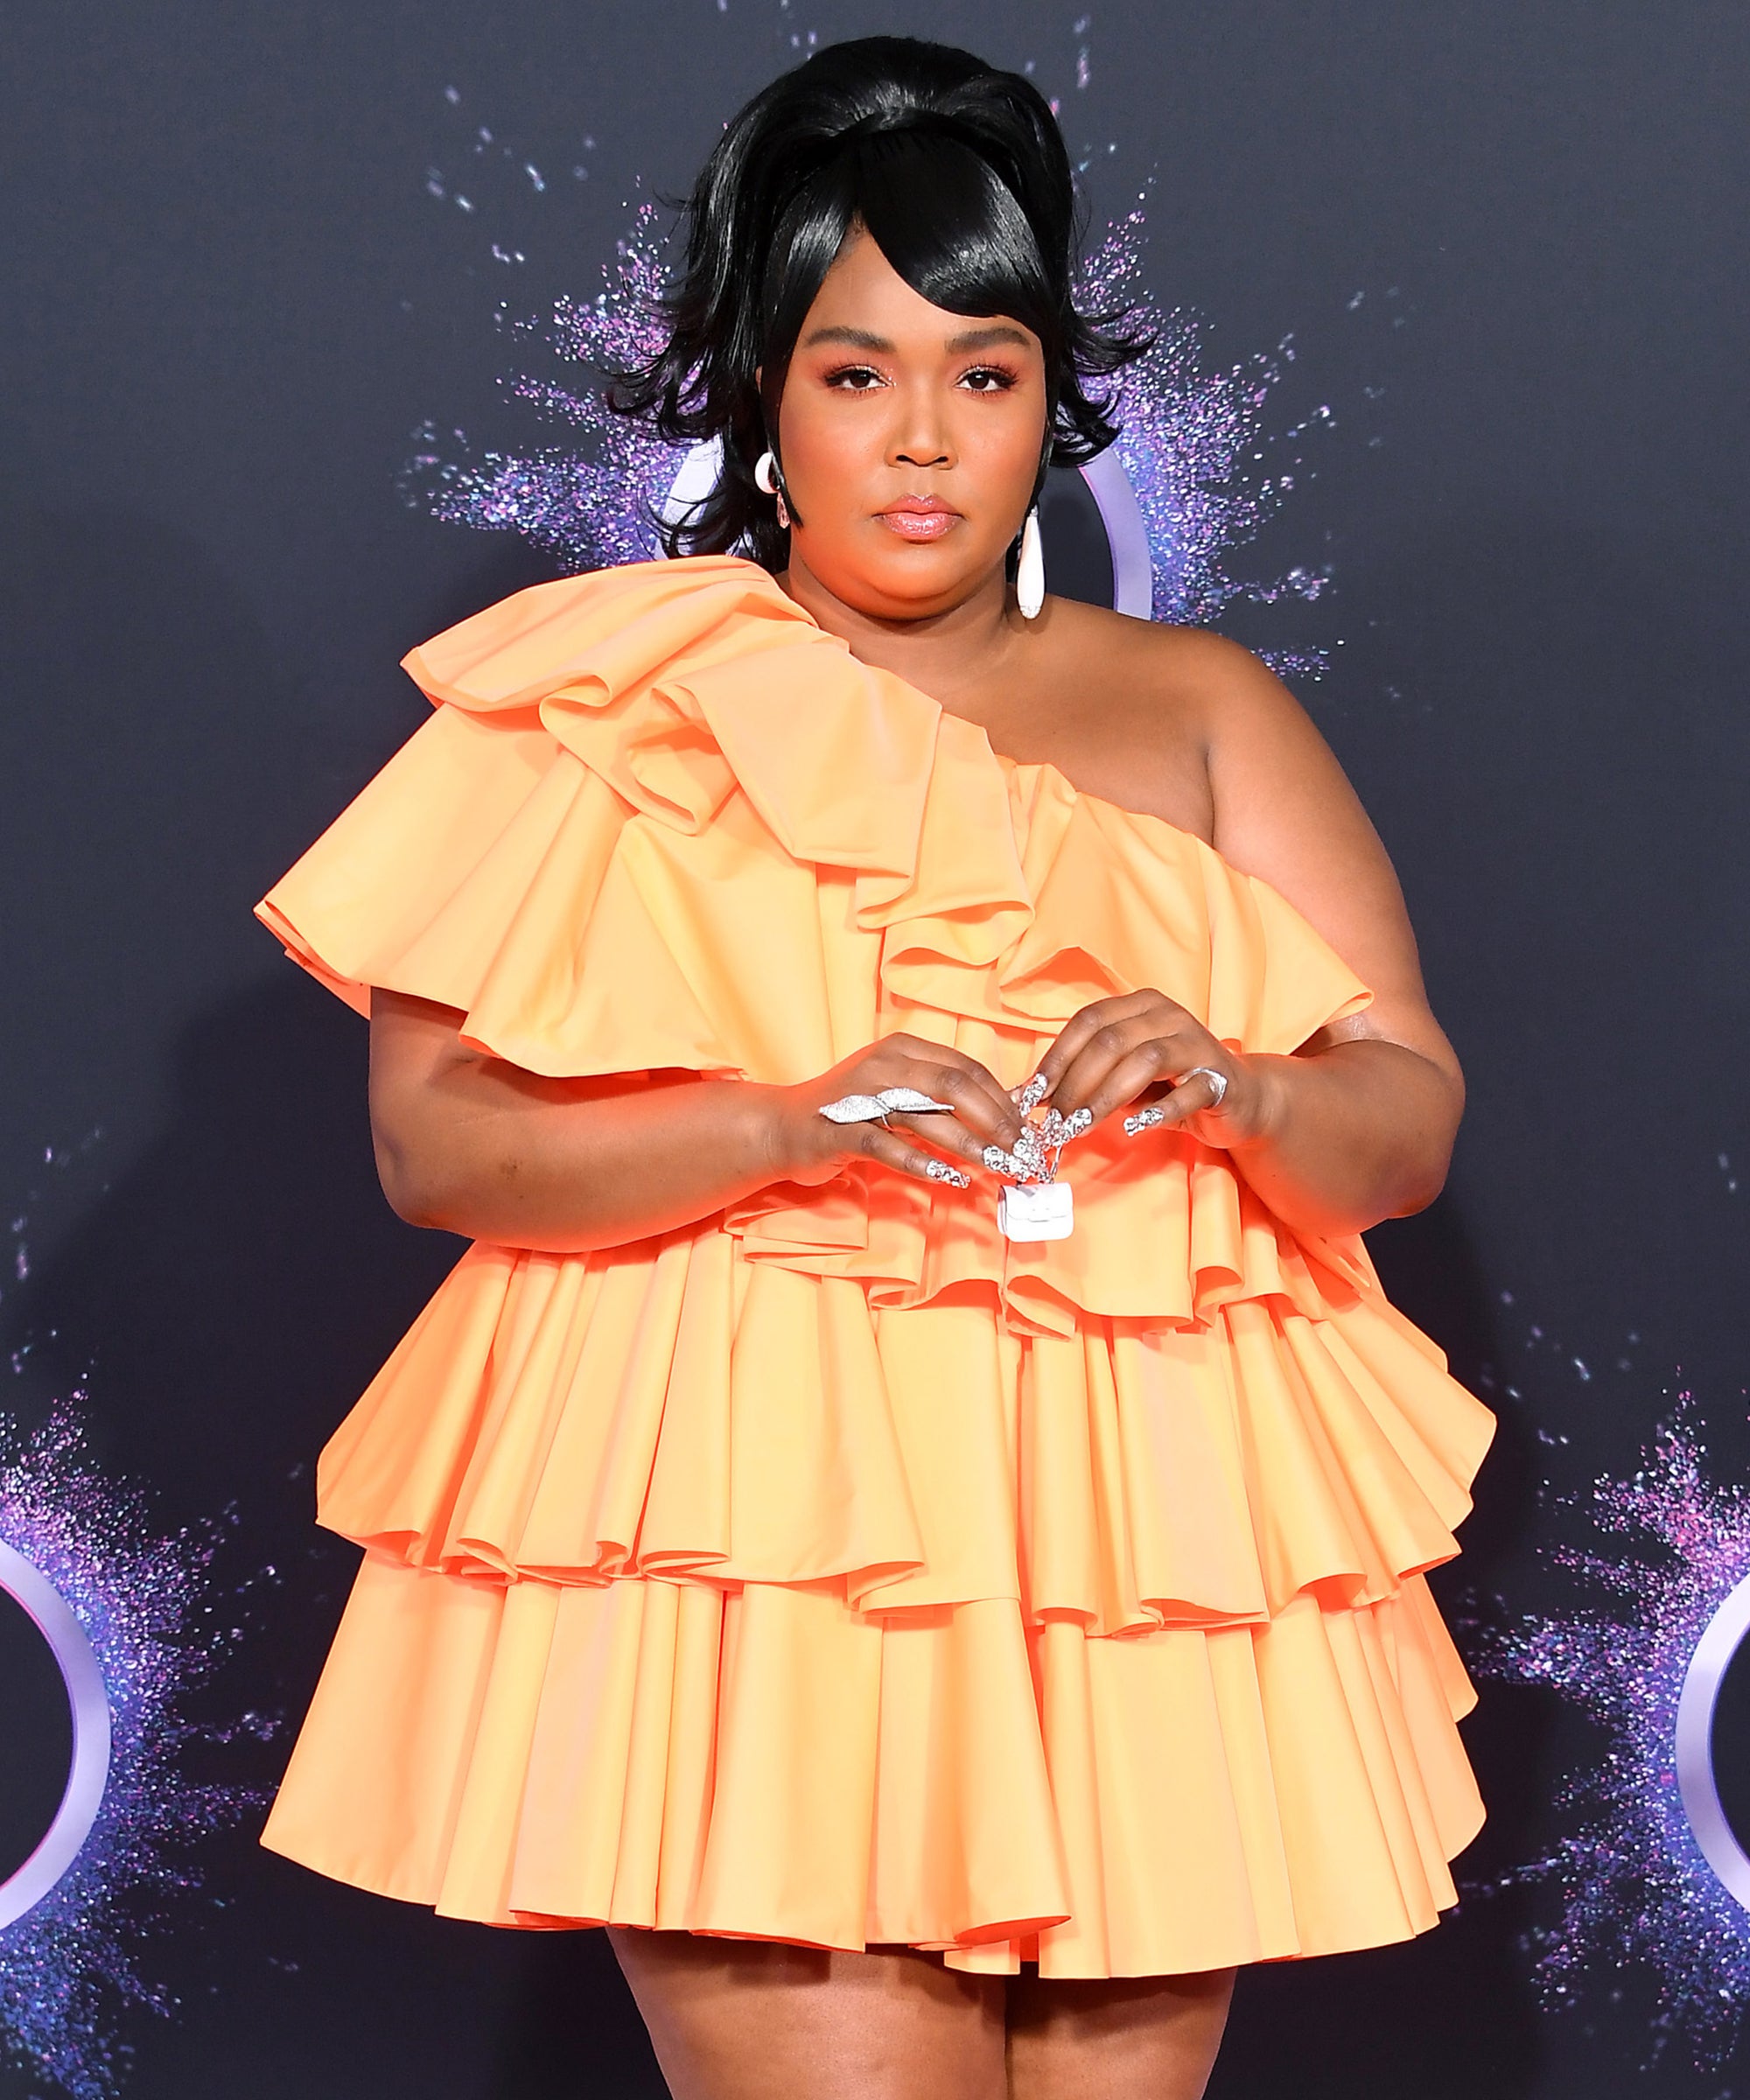 Lizzo shows off a tiny purse at the AMAs | wzzm13.com